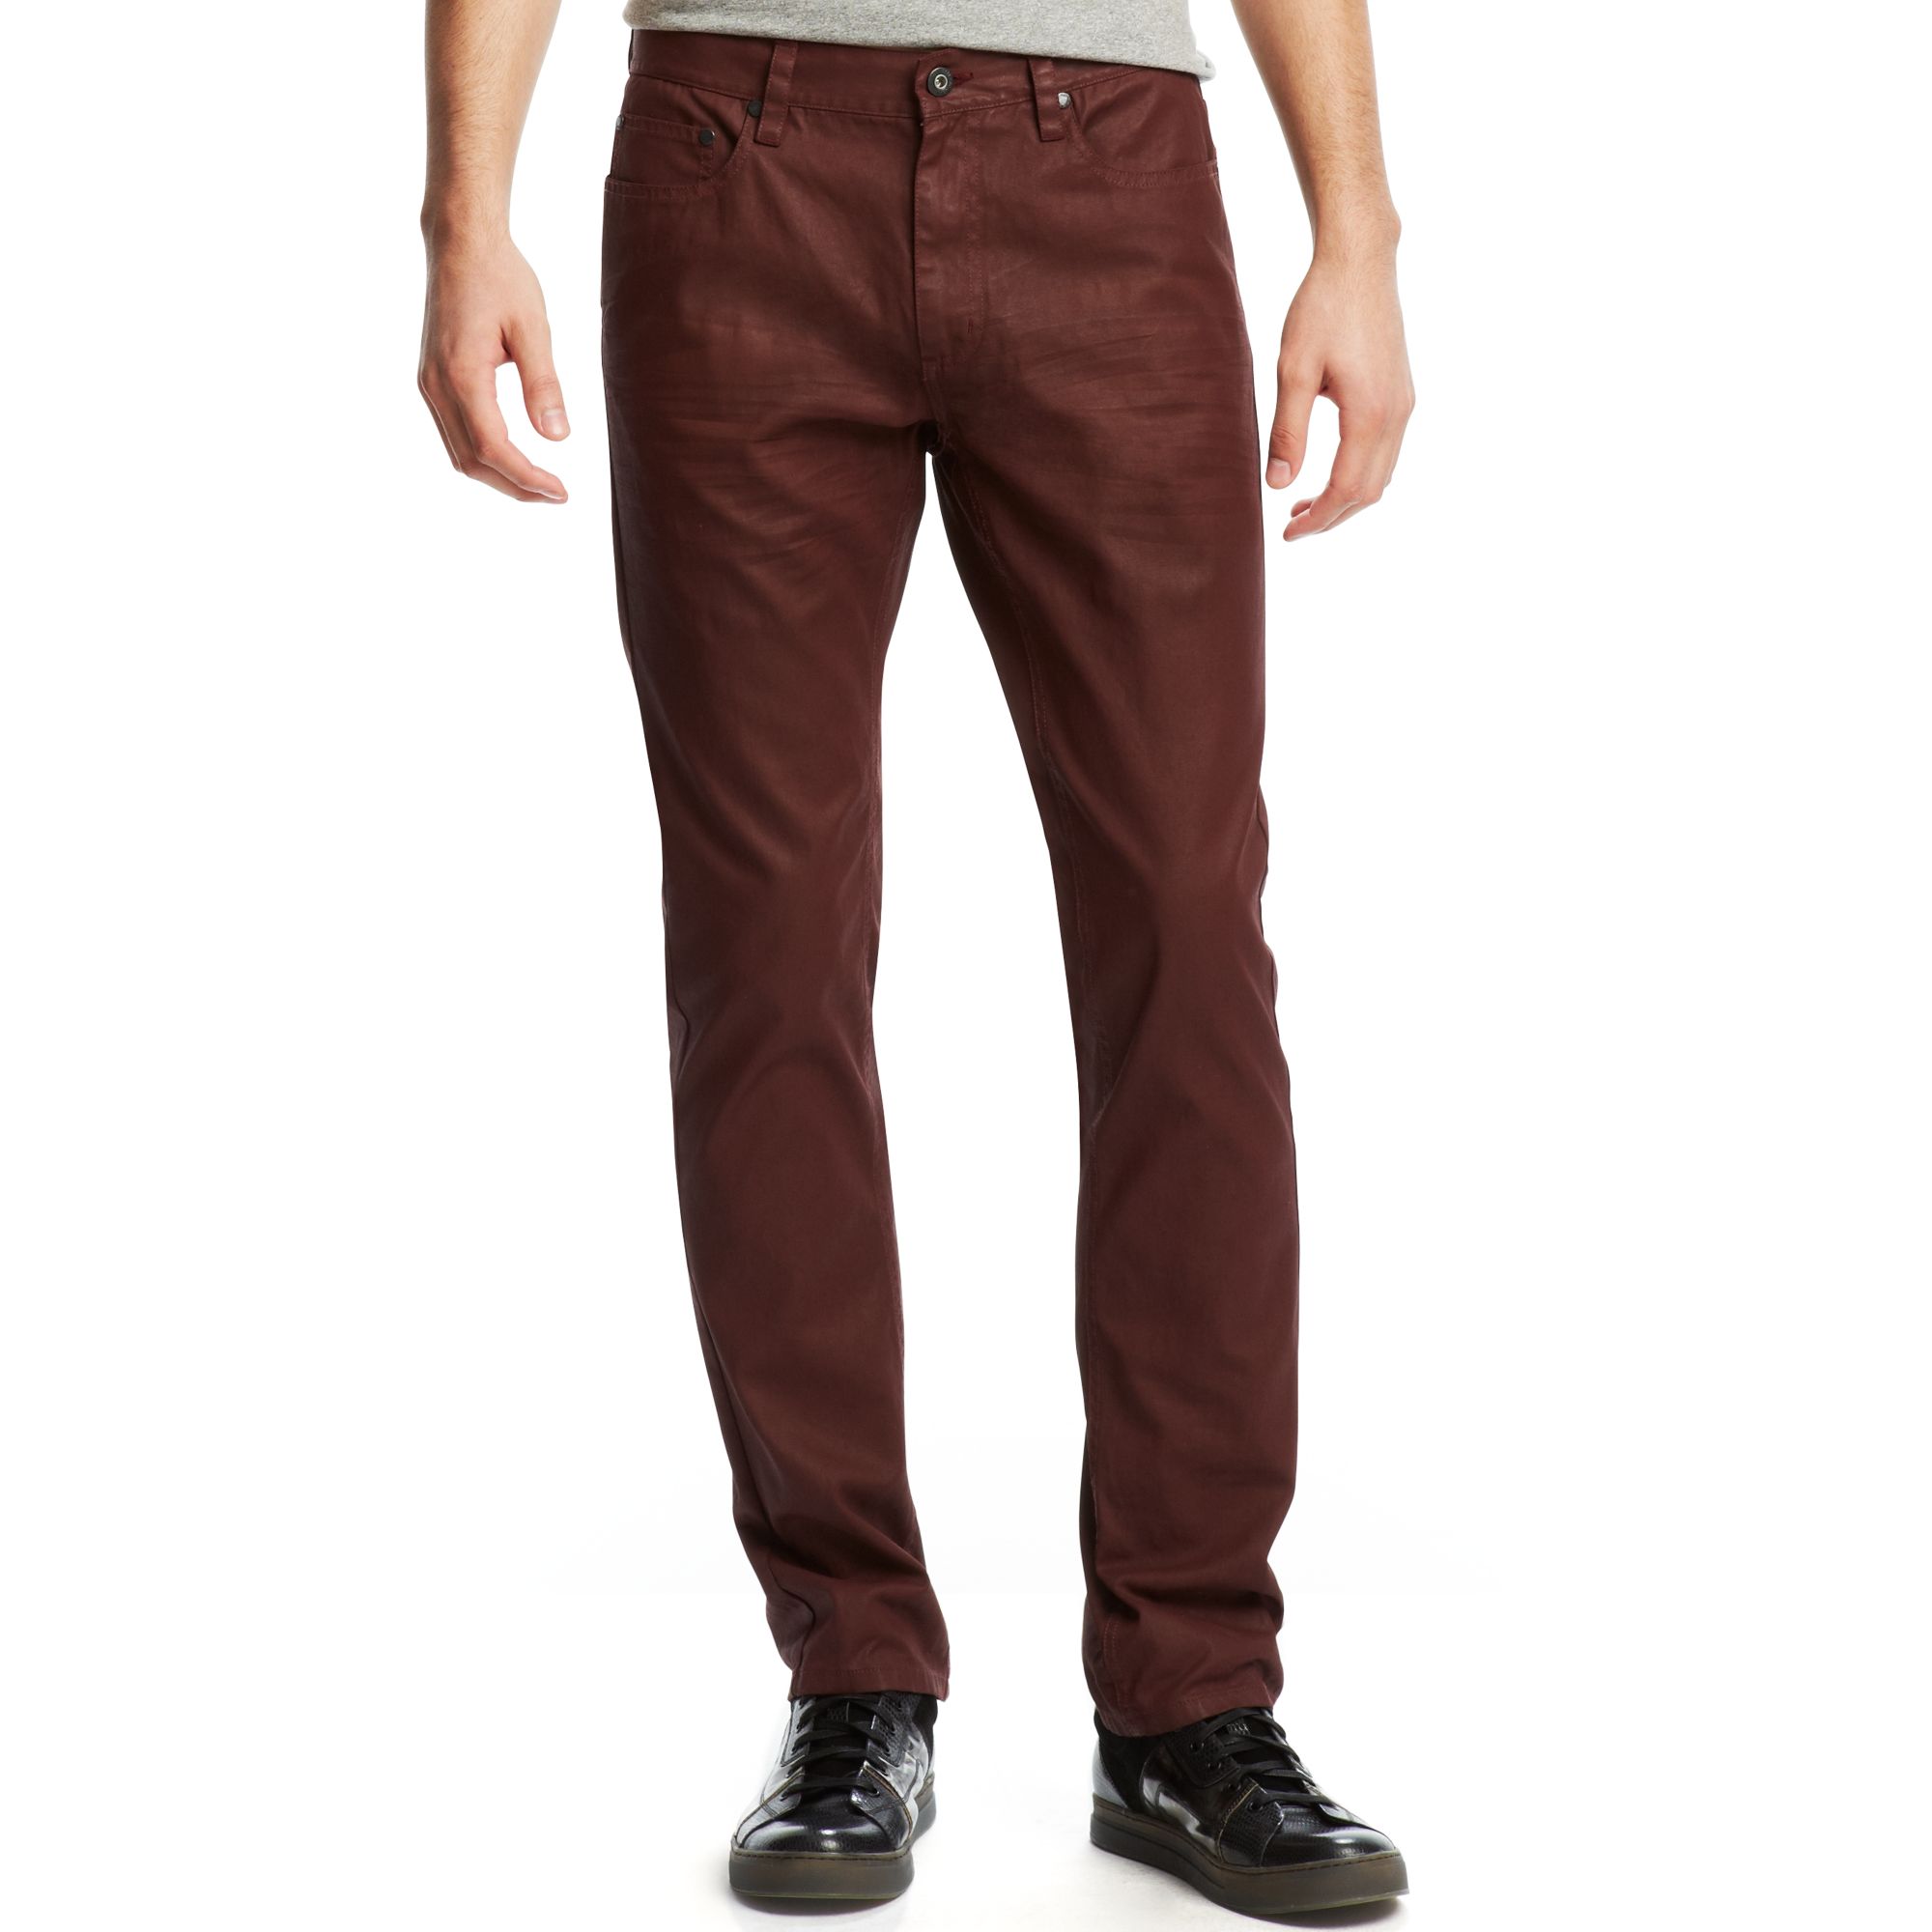 Kenneth Cole Reaction Five Pocket Pants in Red for Men - Lyst